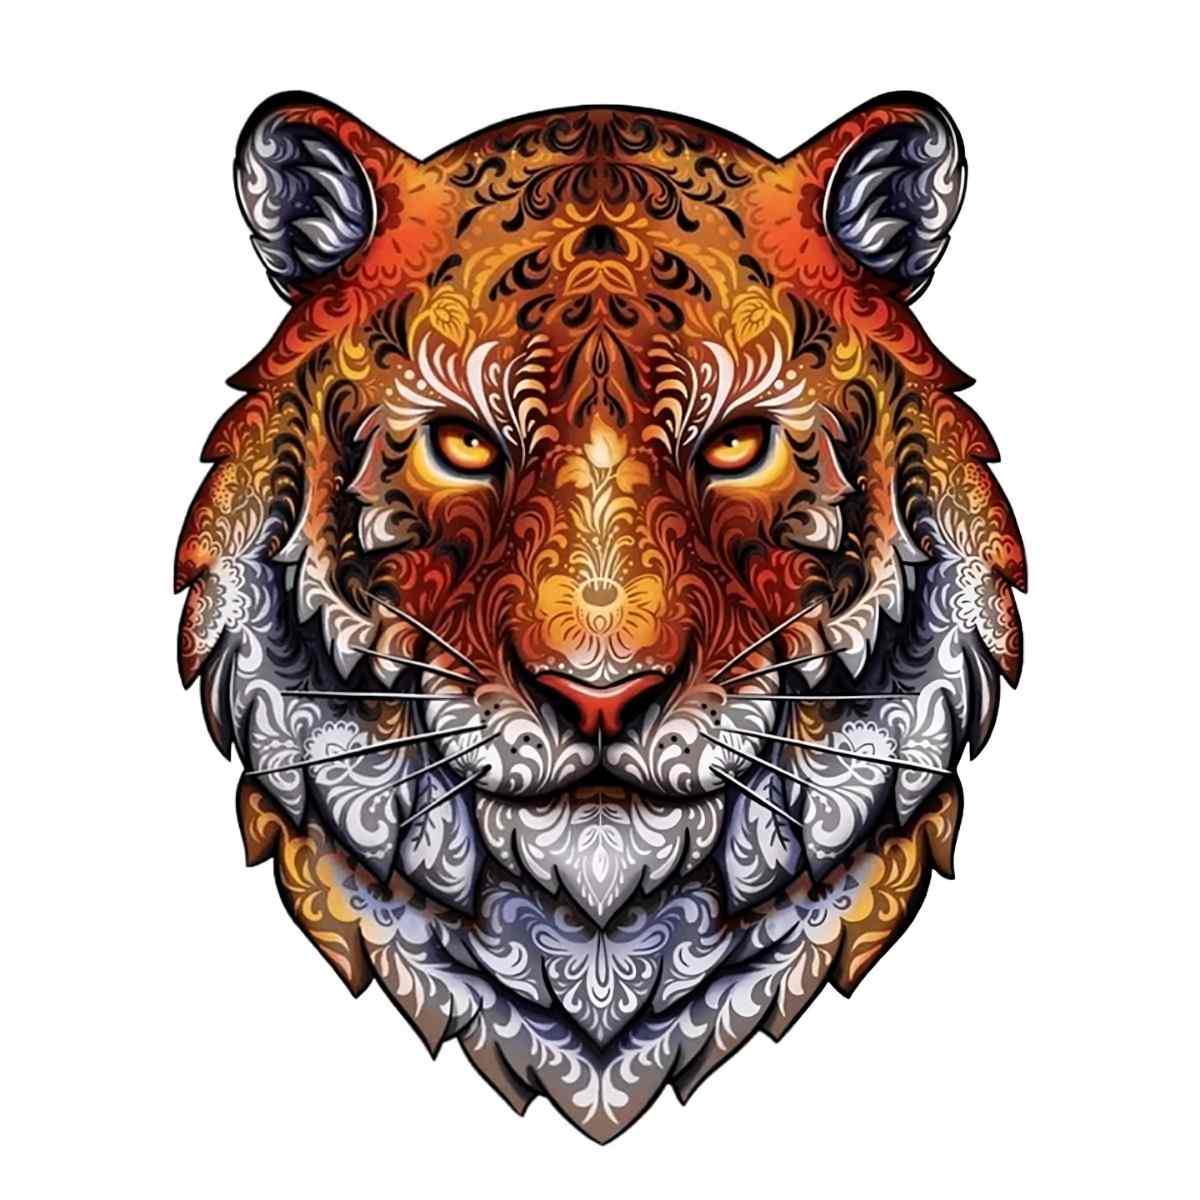 A5 Tiger - Jigsaw Puzzle